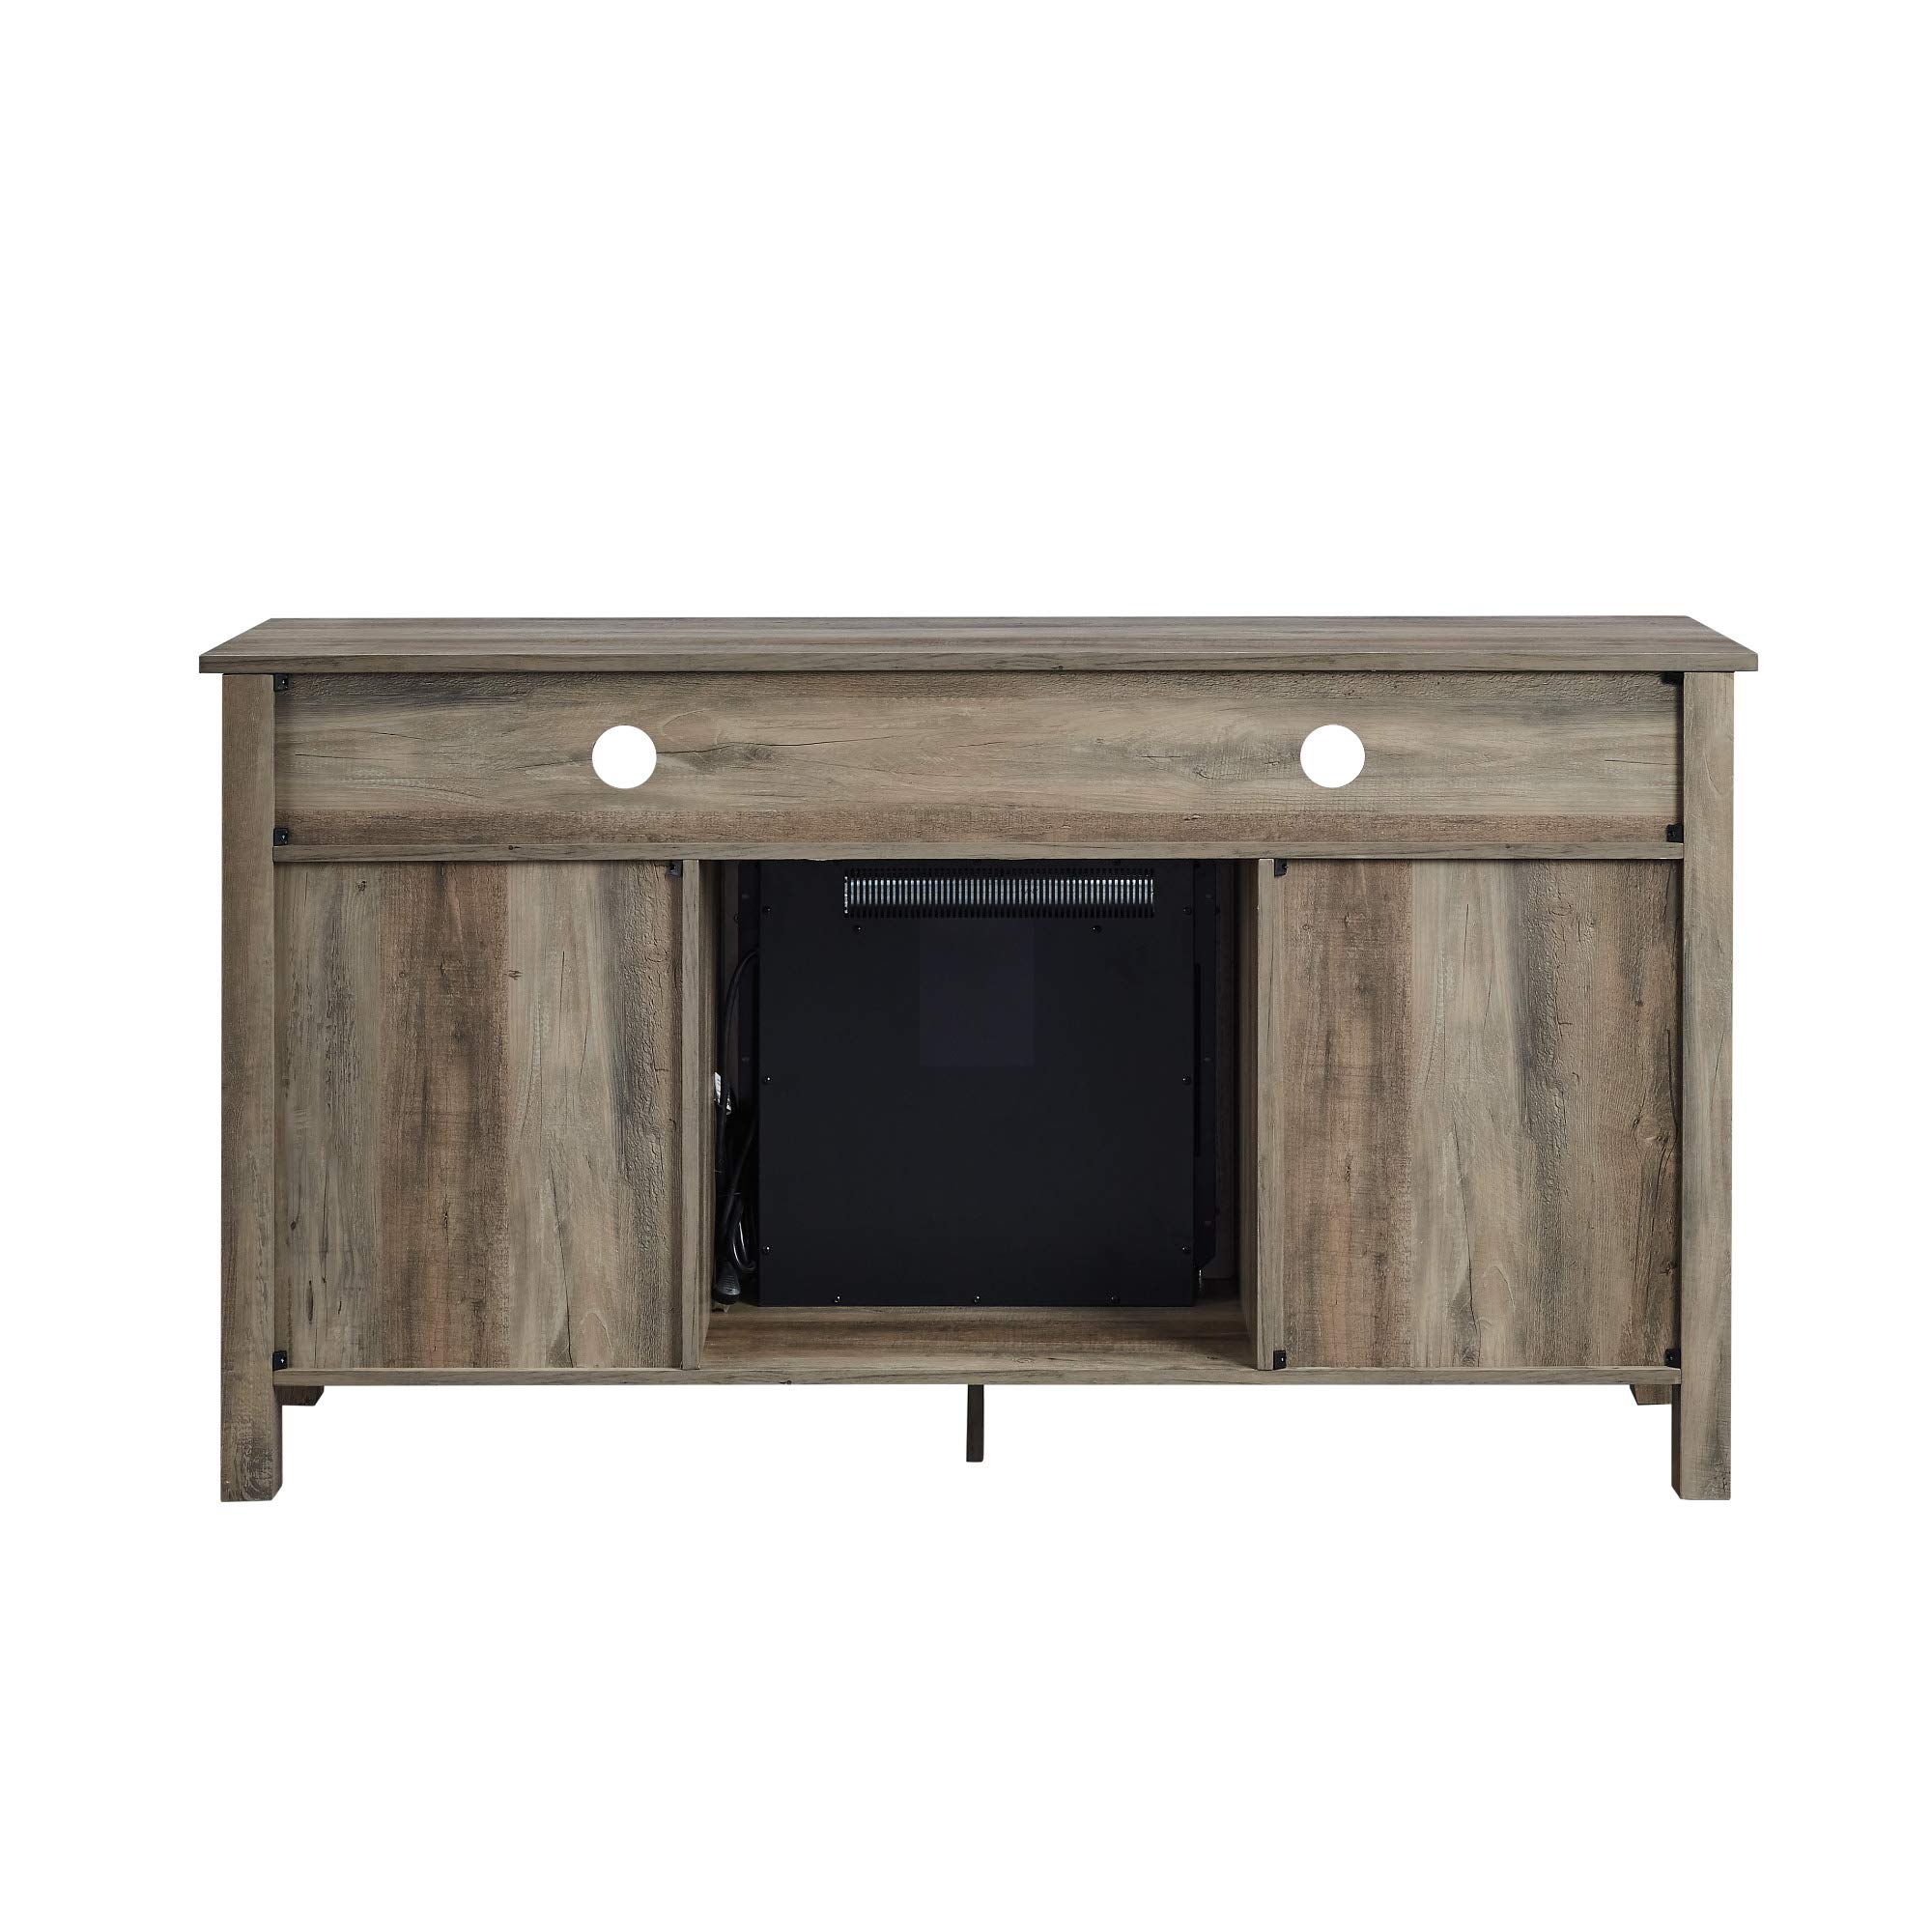 Walker Edison Glenwood Rustic Farmhouse Glass Door Highboy Fireplace TV Stand for TVs up to 65 Inches, 58 Inch, Grey Wash